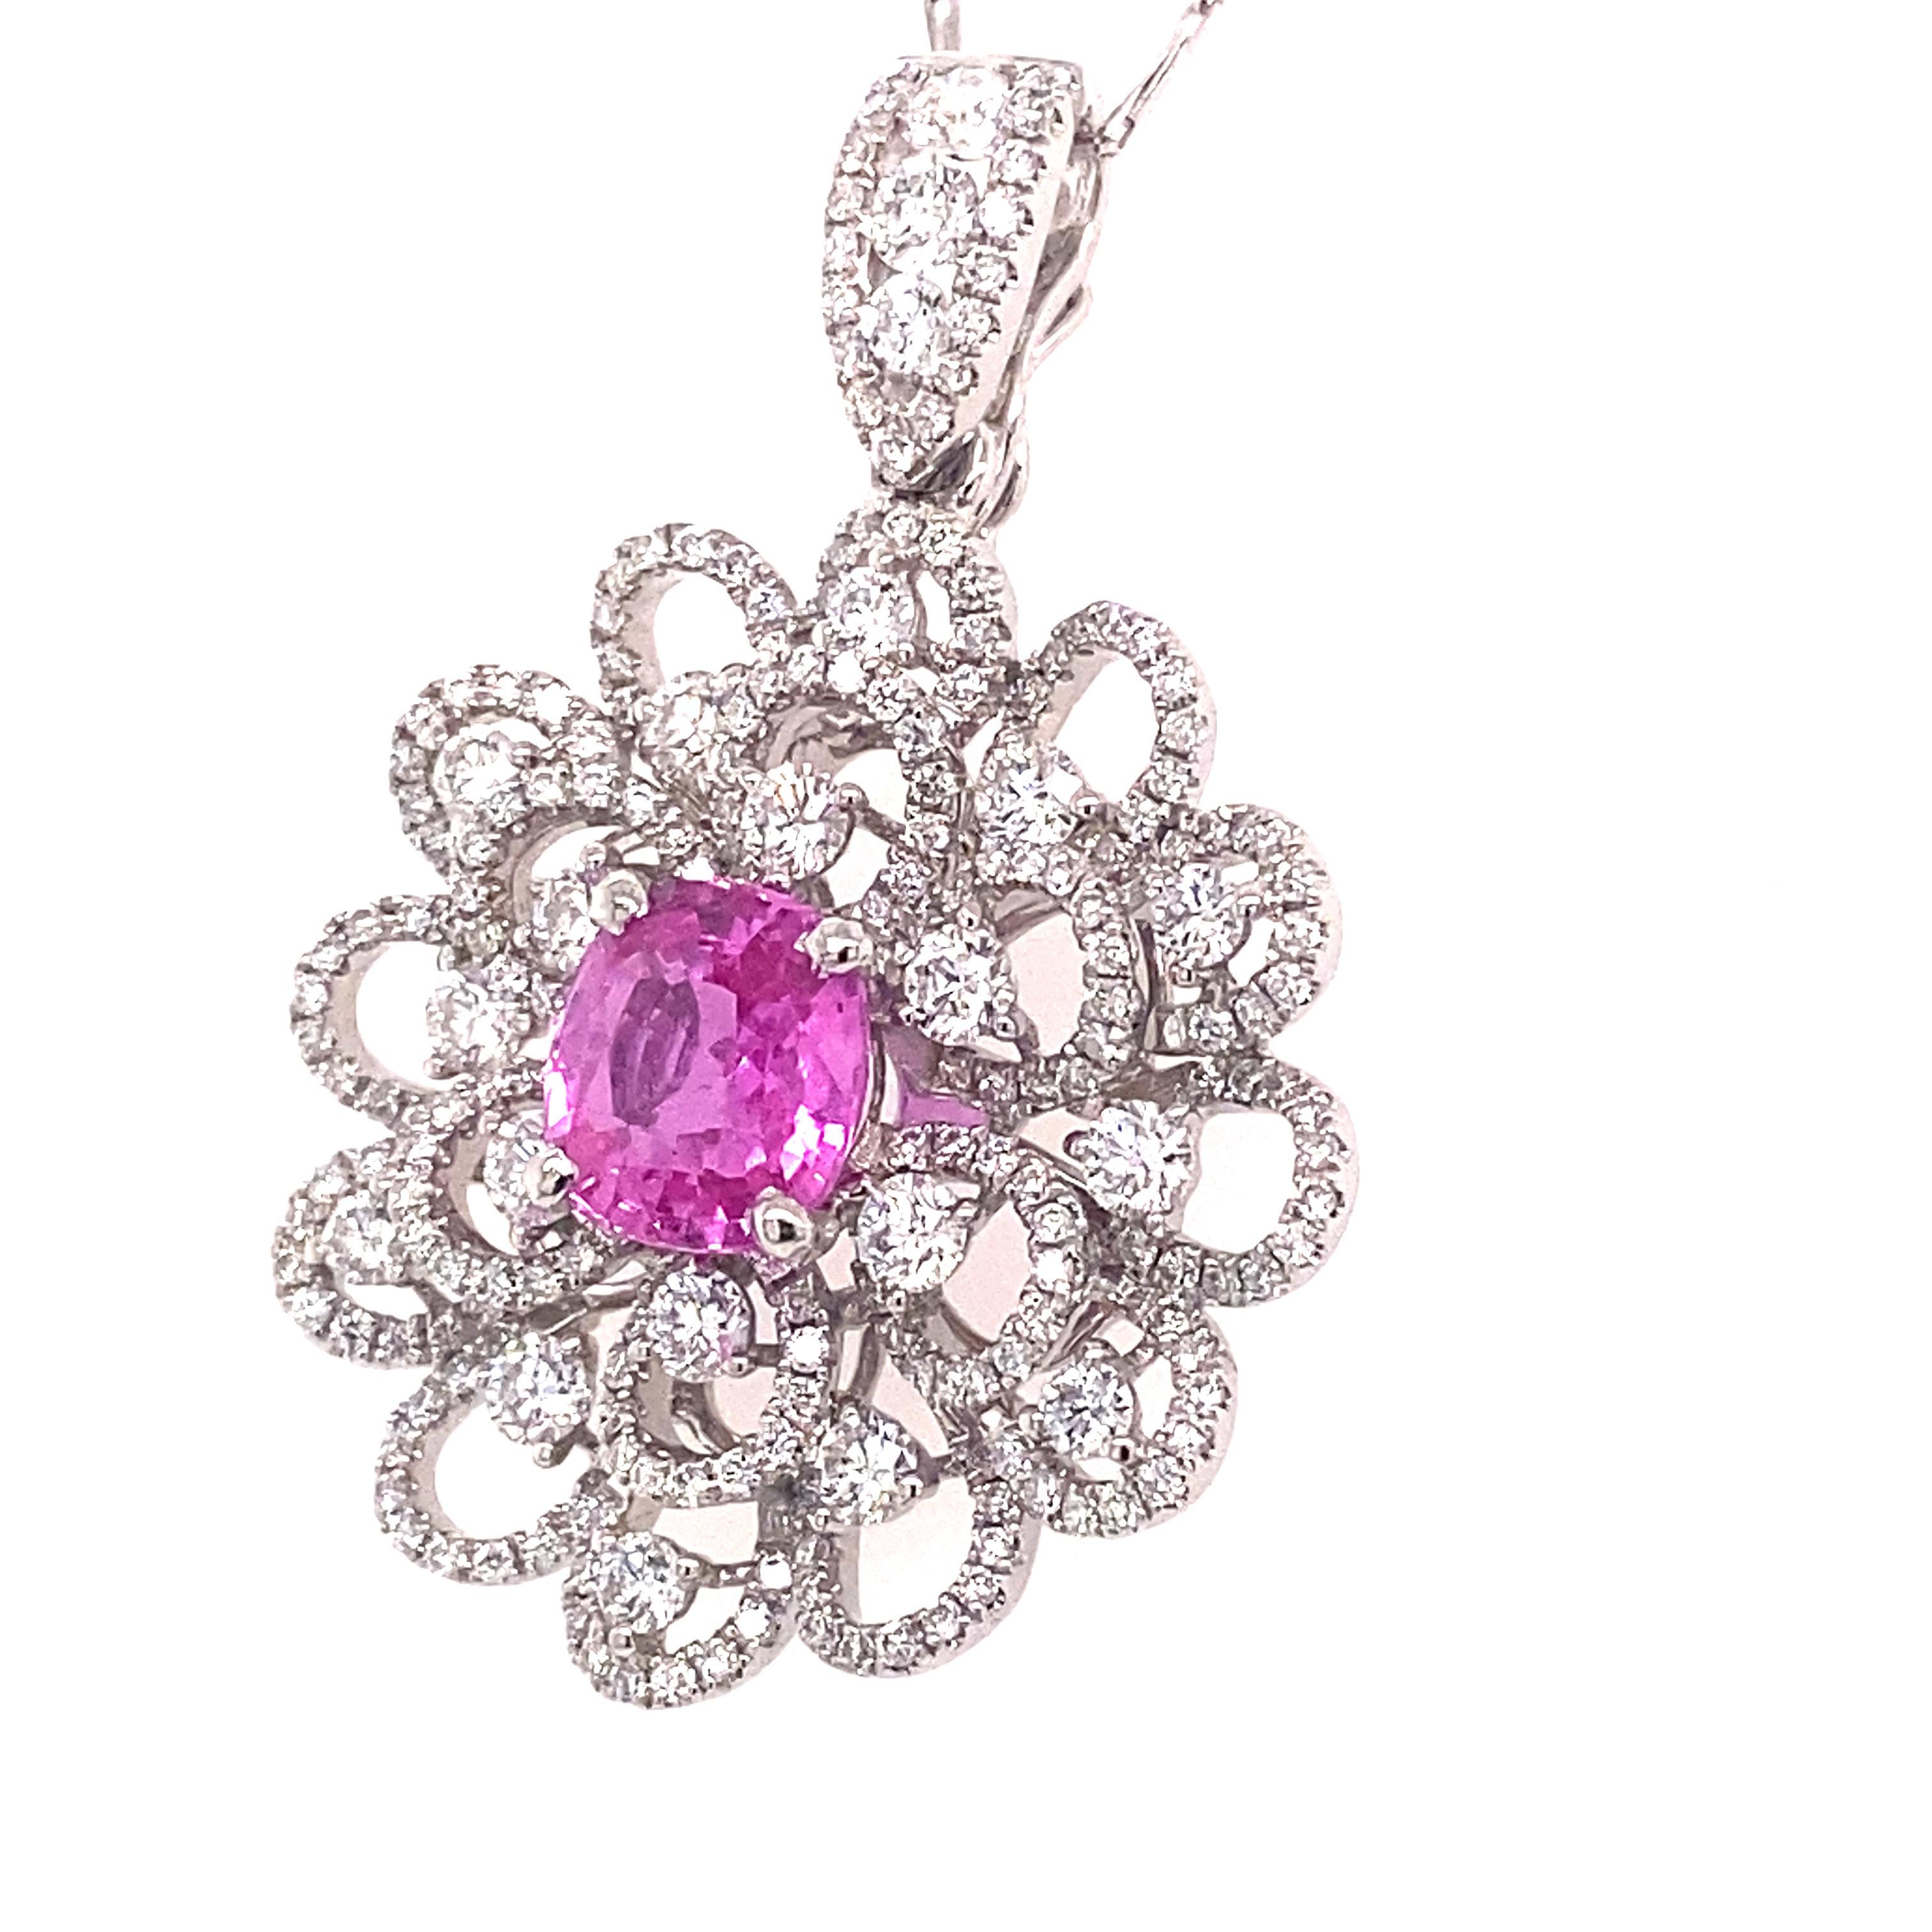 Cushion Cut 2.45 Carat GIA, Natural Pink Sapphire Set in 18k Diamond Floral Pendant Necklace For Sale